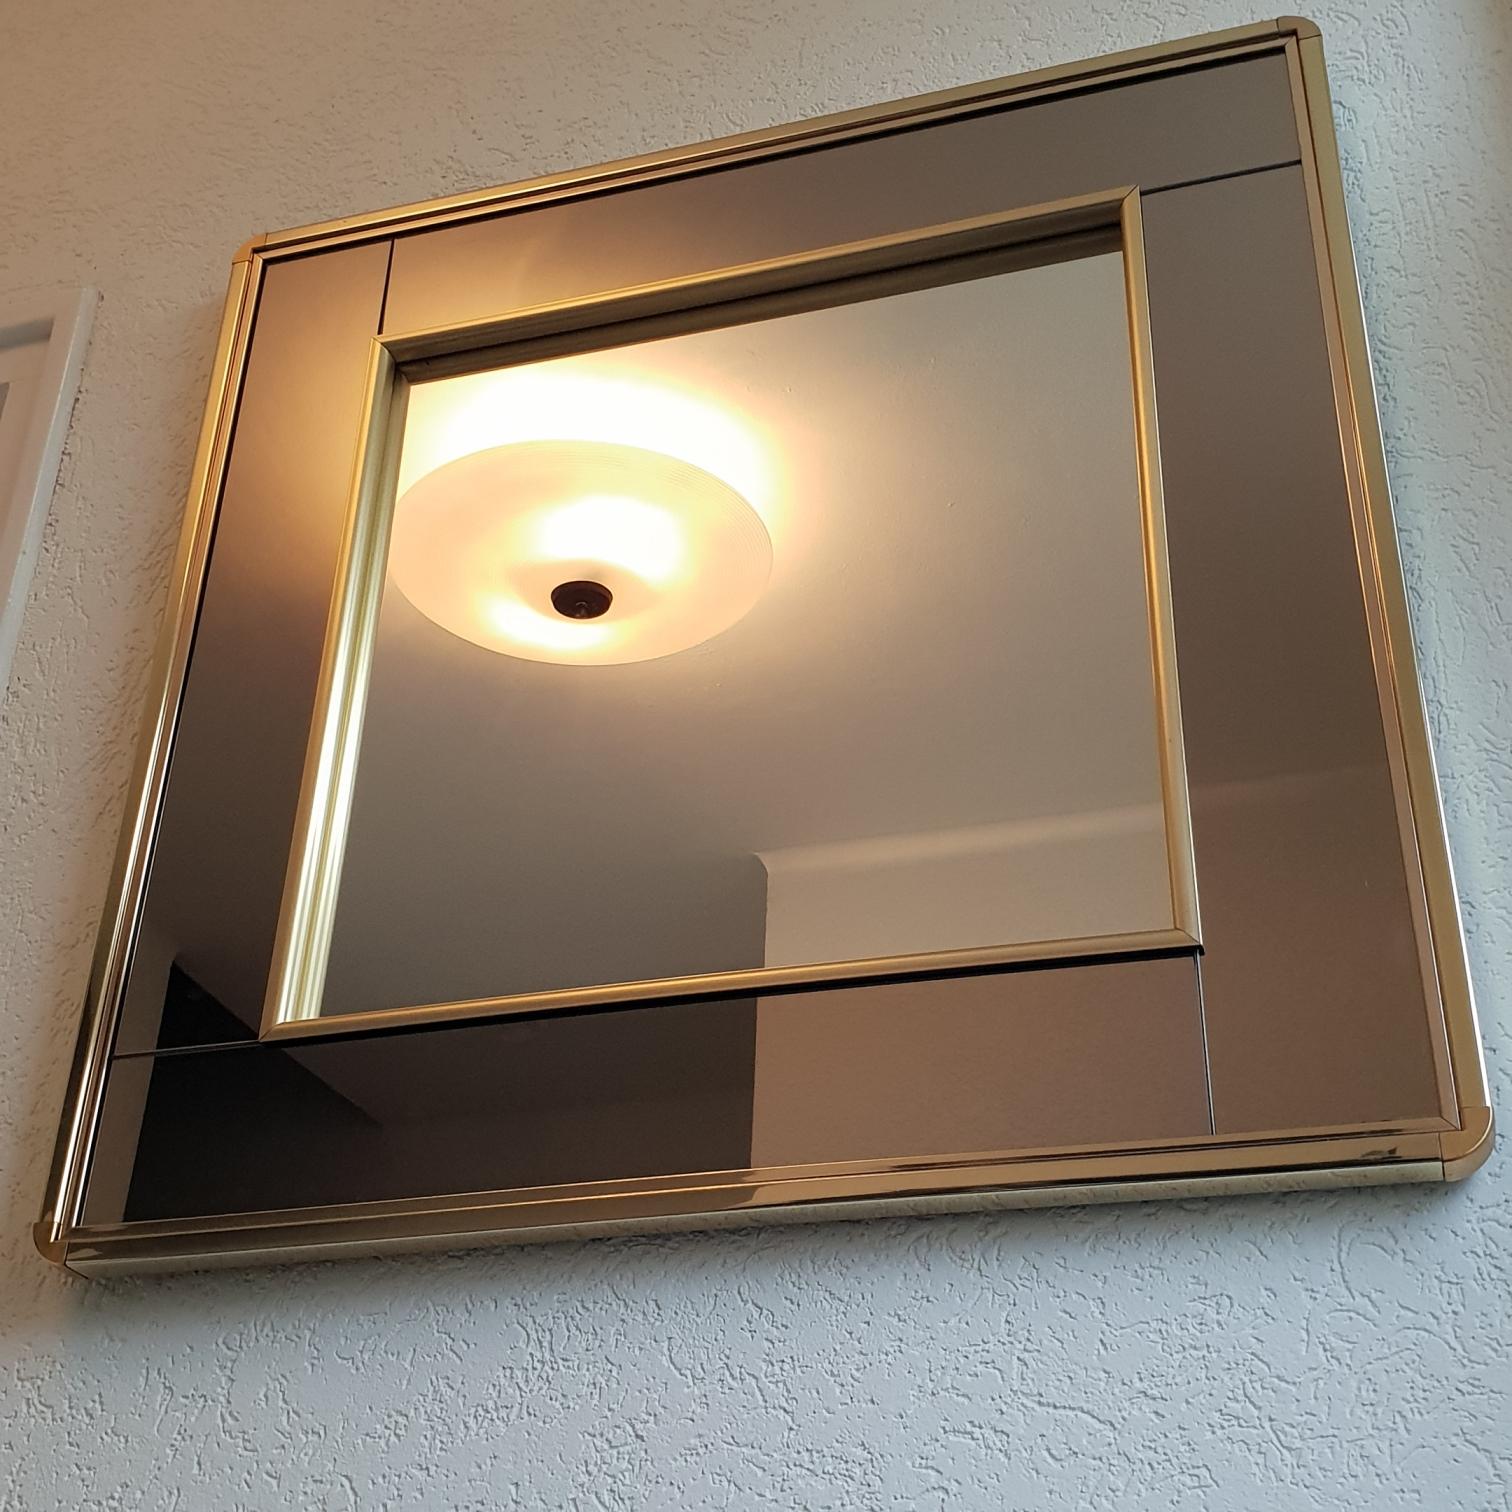 Gold-plated square mirror with smoked and clear mirror glass by Belgo Chrome, 1980s
In excellent vintage condition.